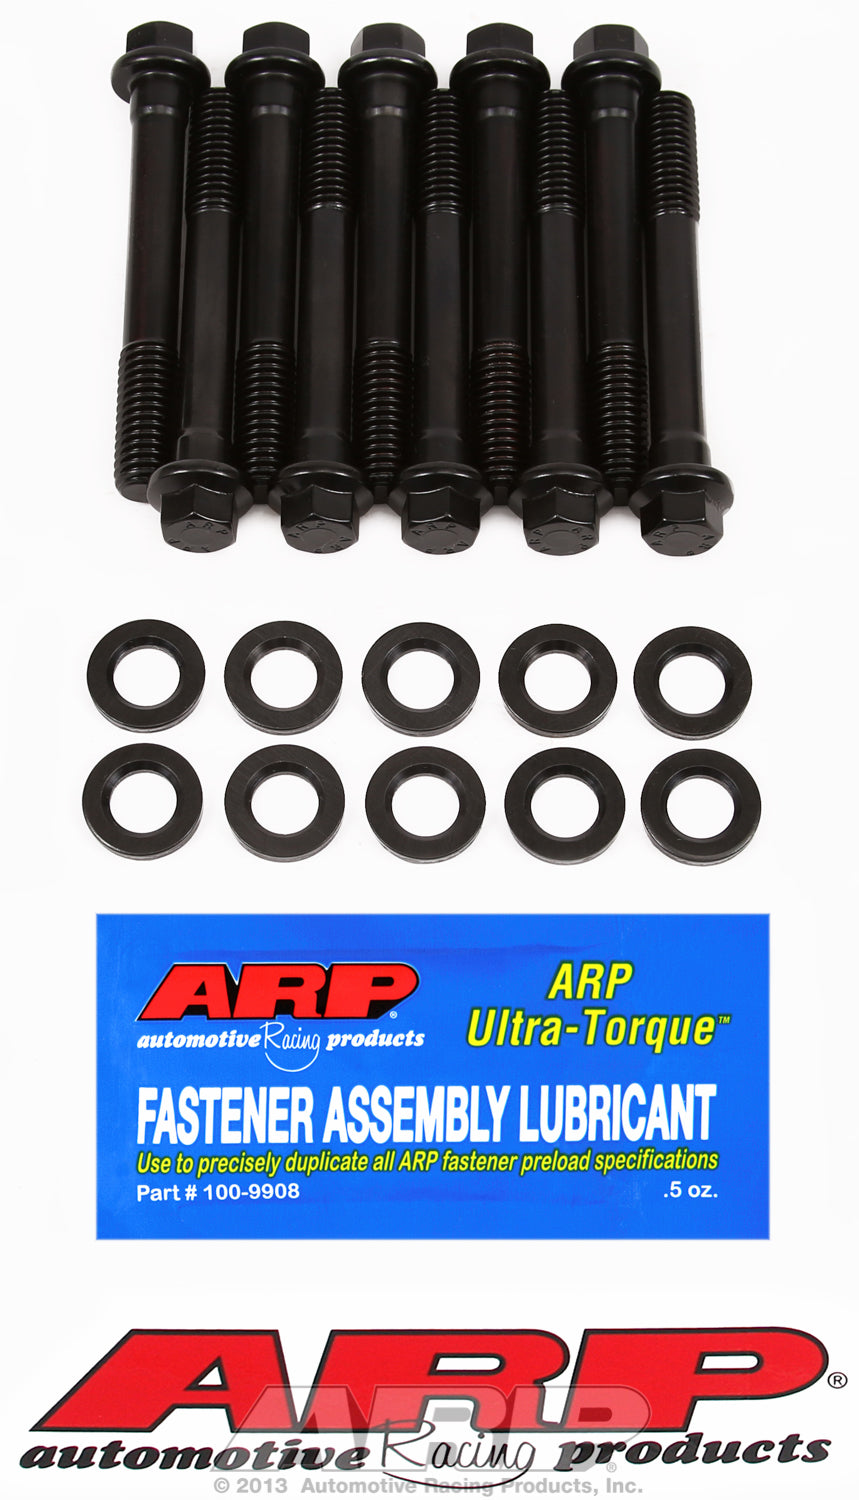 Main Bolt Kit for Ford 289-302 cid - front or rear sump - oil pickup standoff bolt included